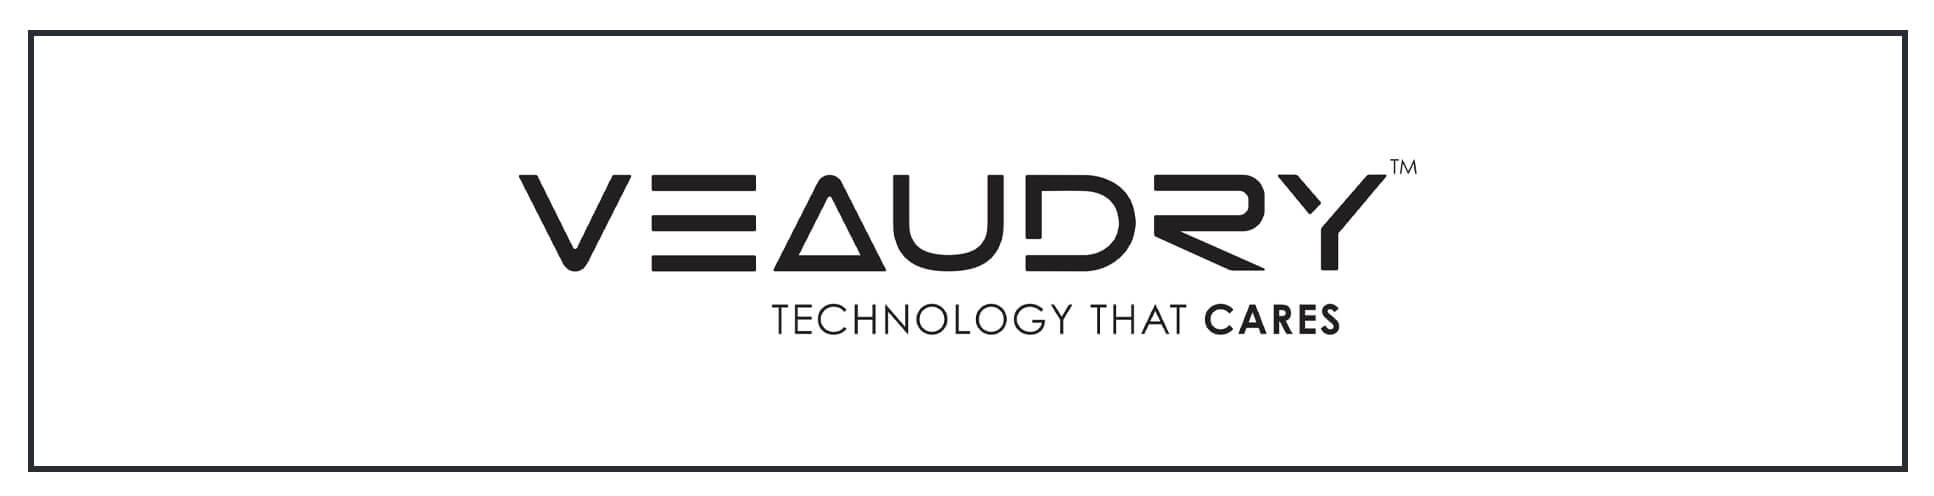 A logo for veaudry technology cards.